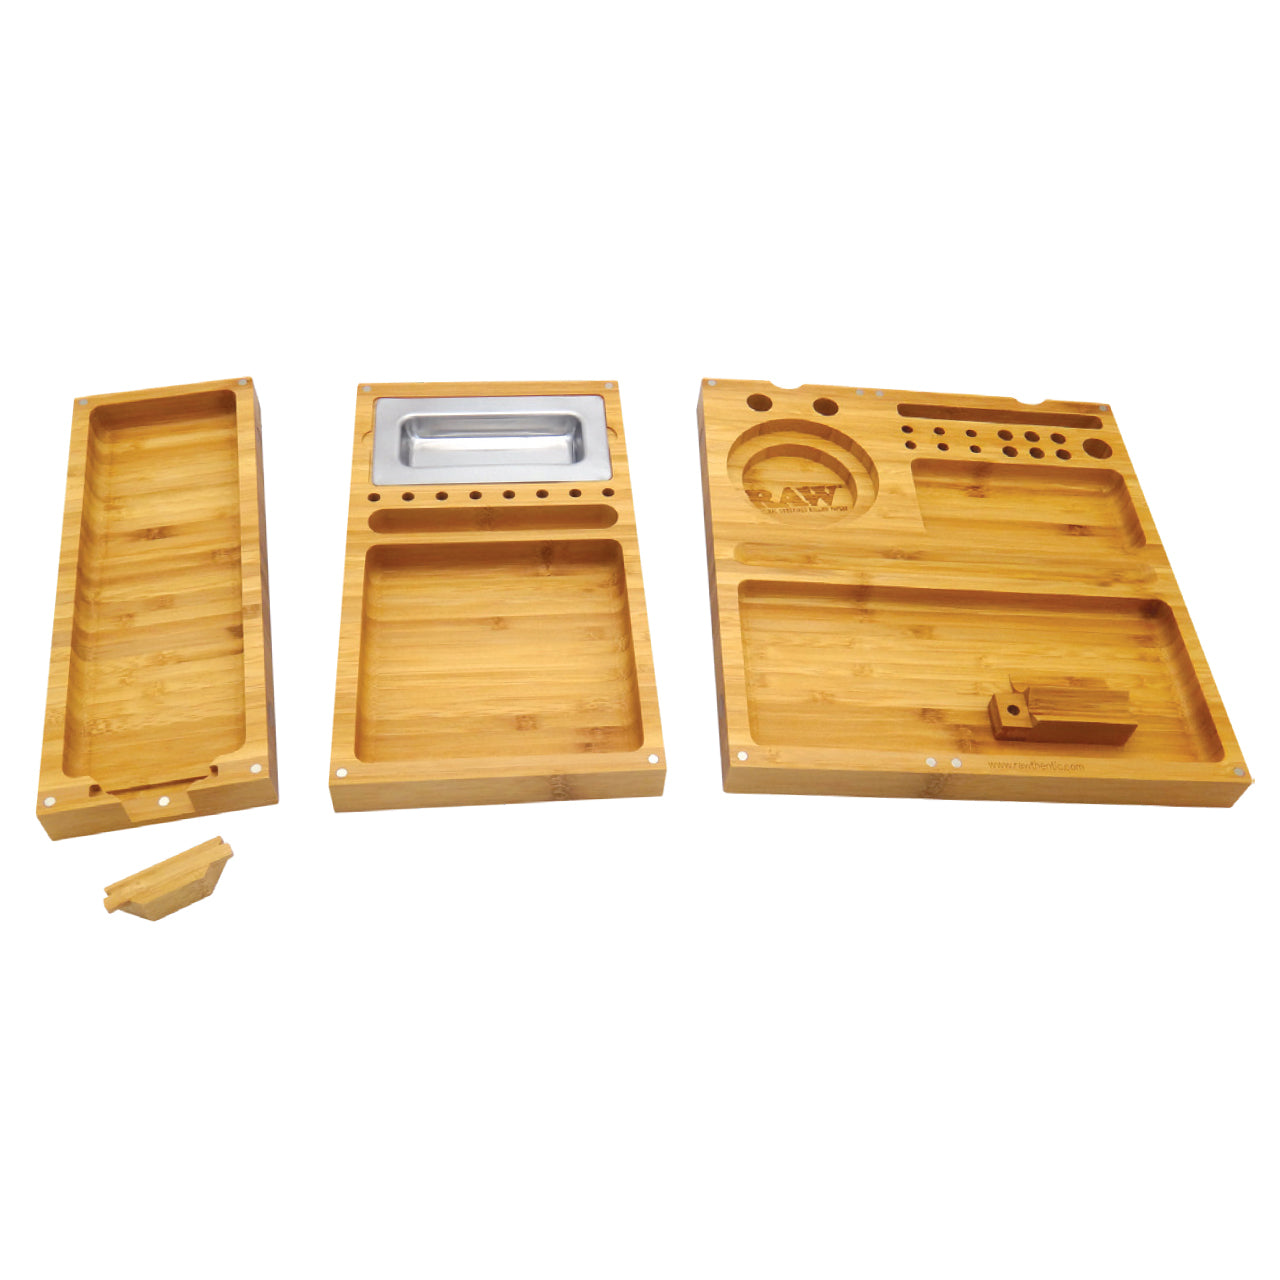 raw bamboo rolling tray 3 piece